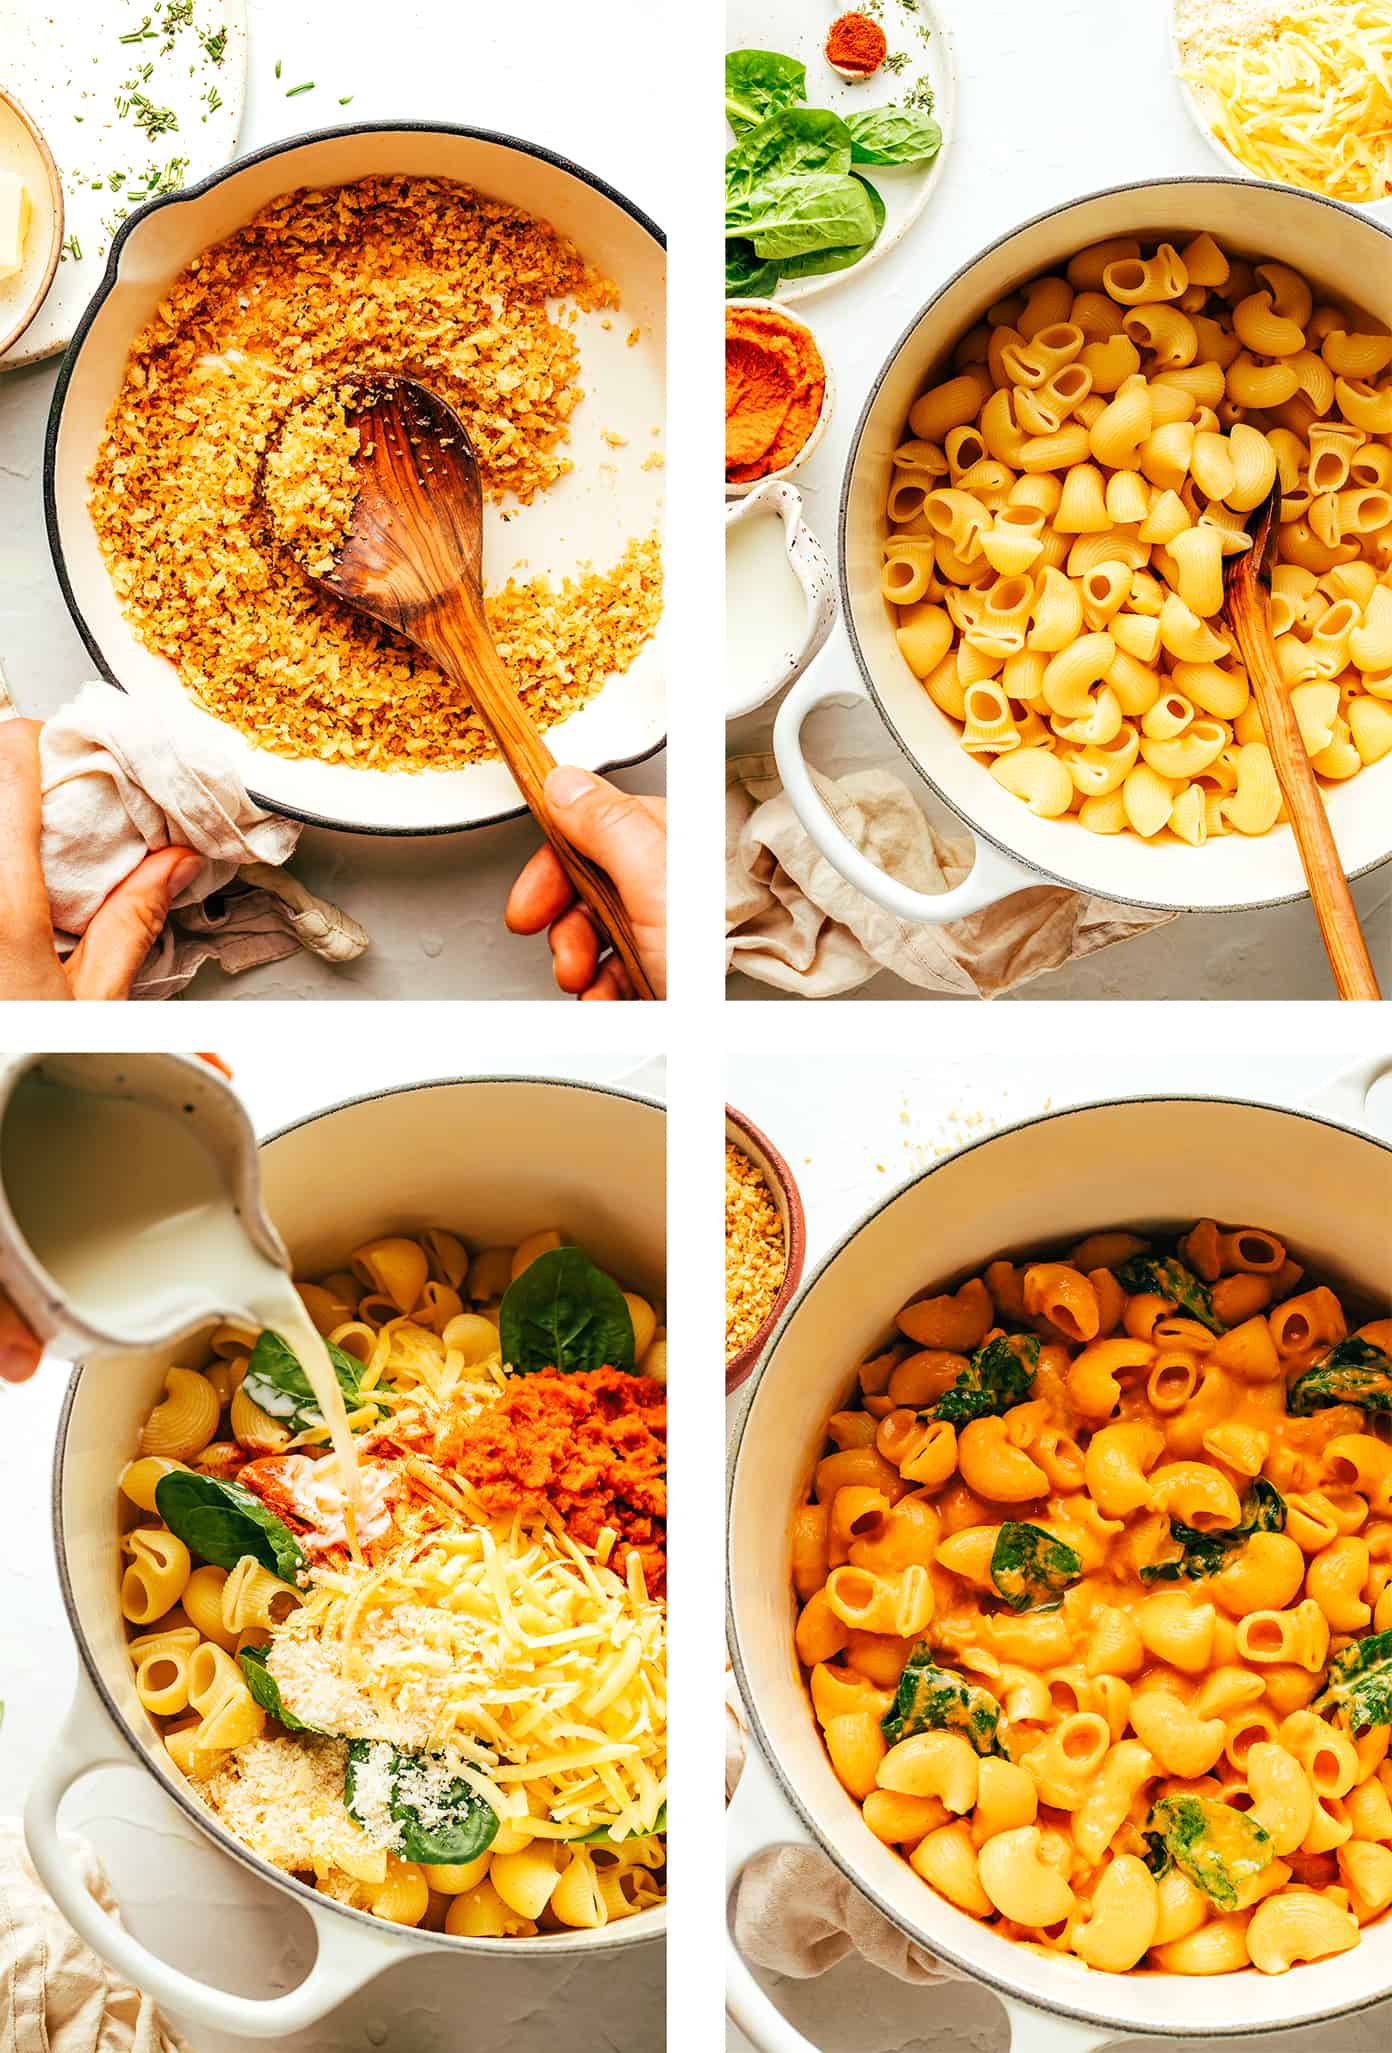 Step by step photos showing how to make pumpkin mac and cheese